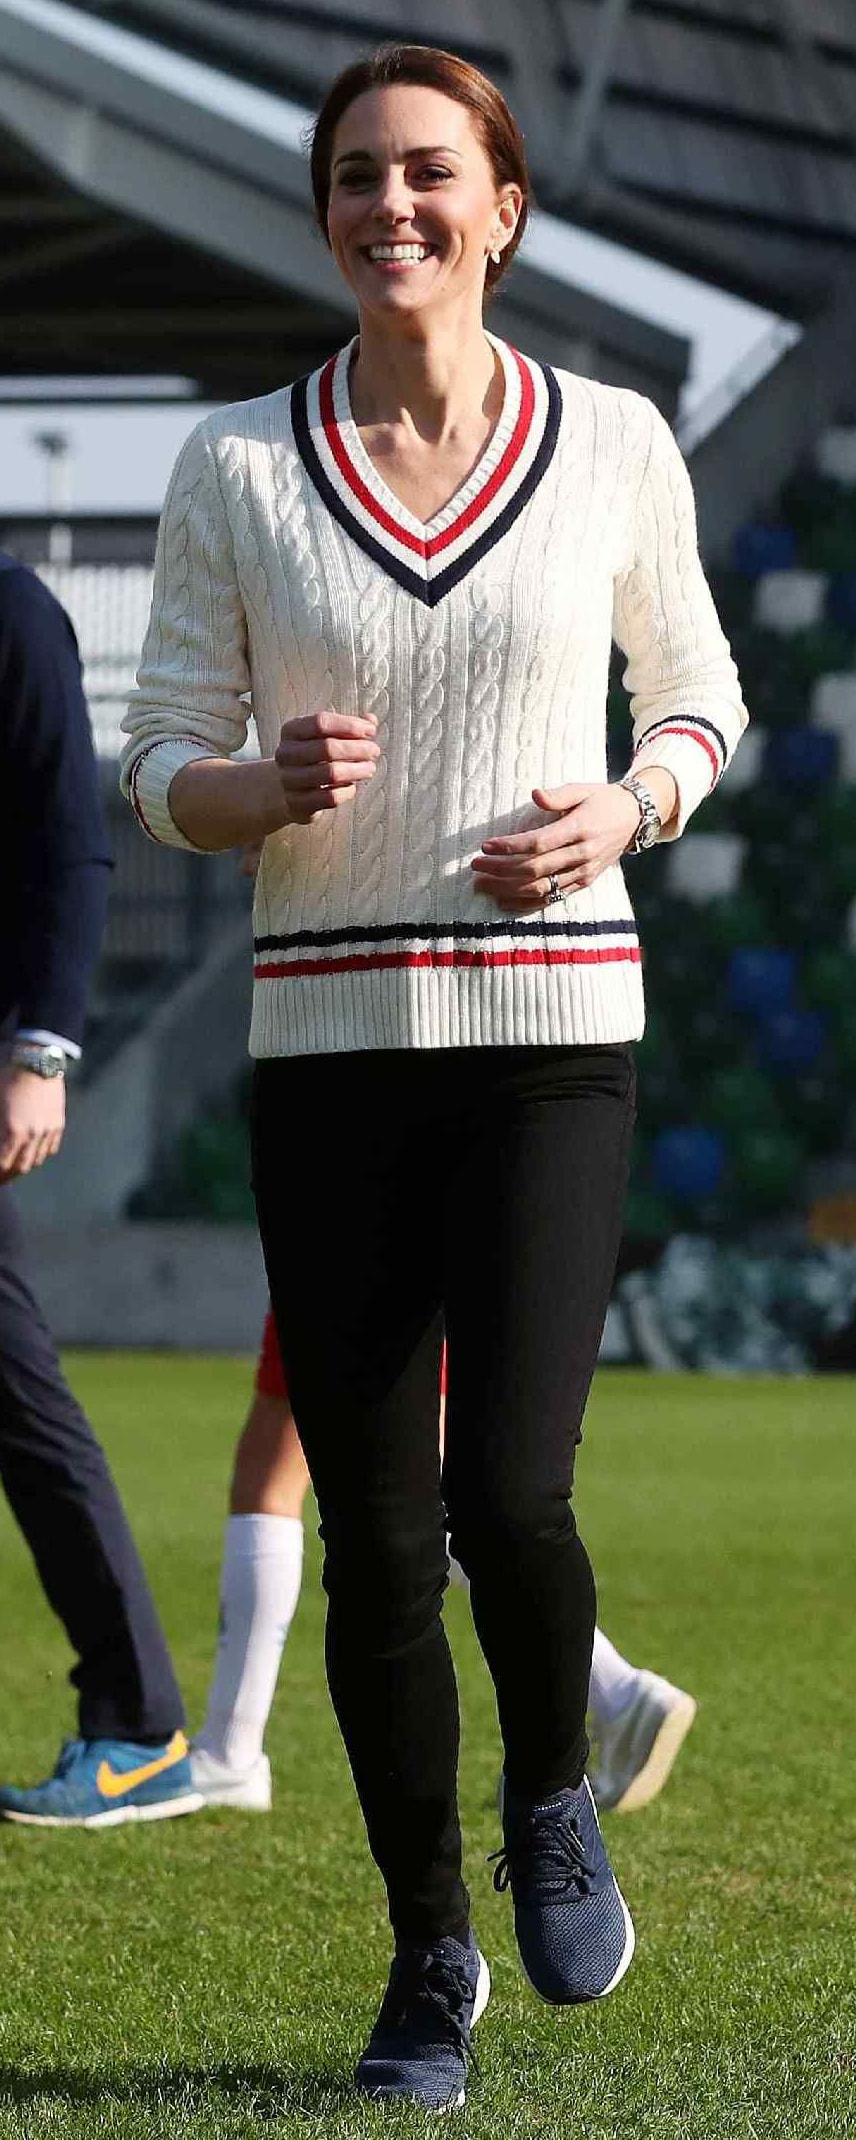 cable knit cricket sweater